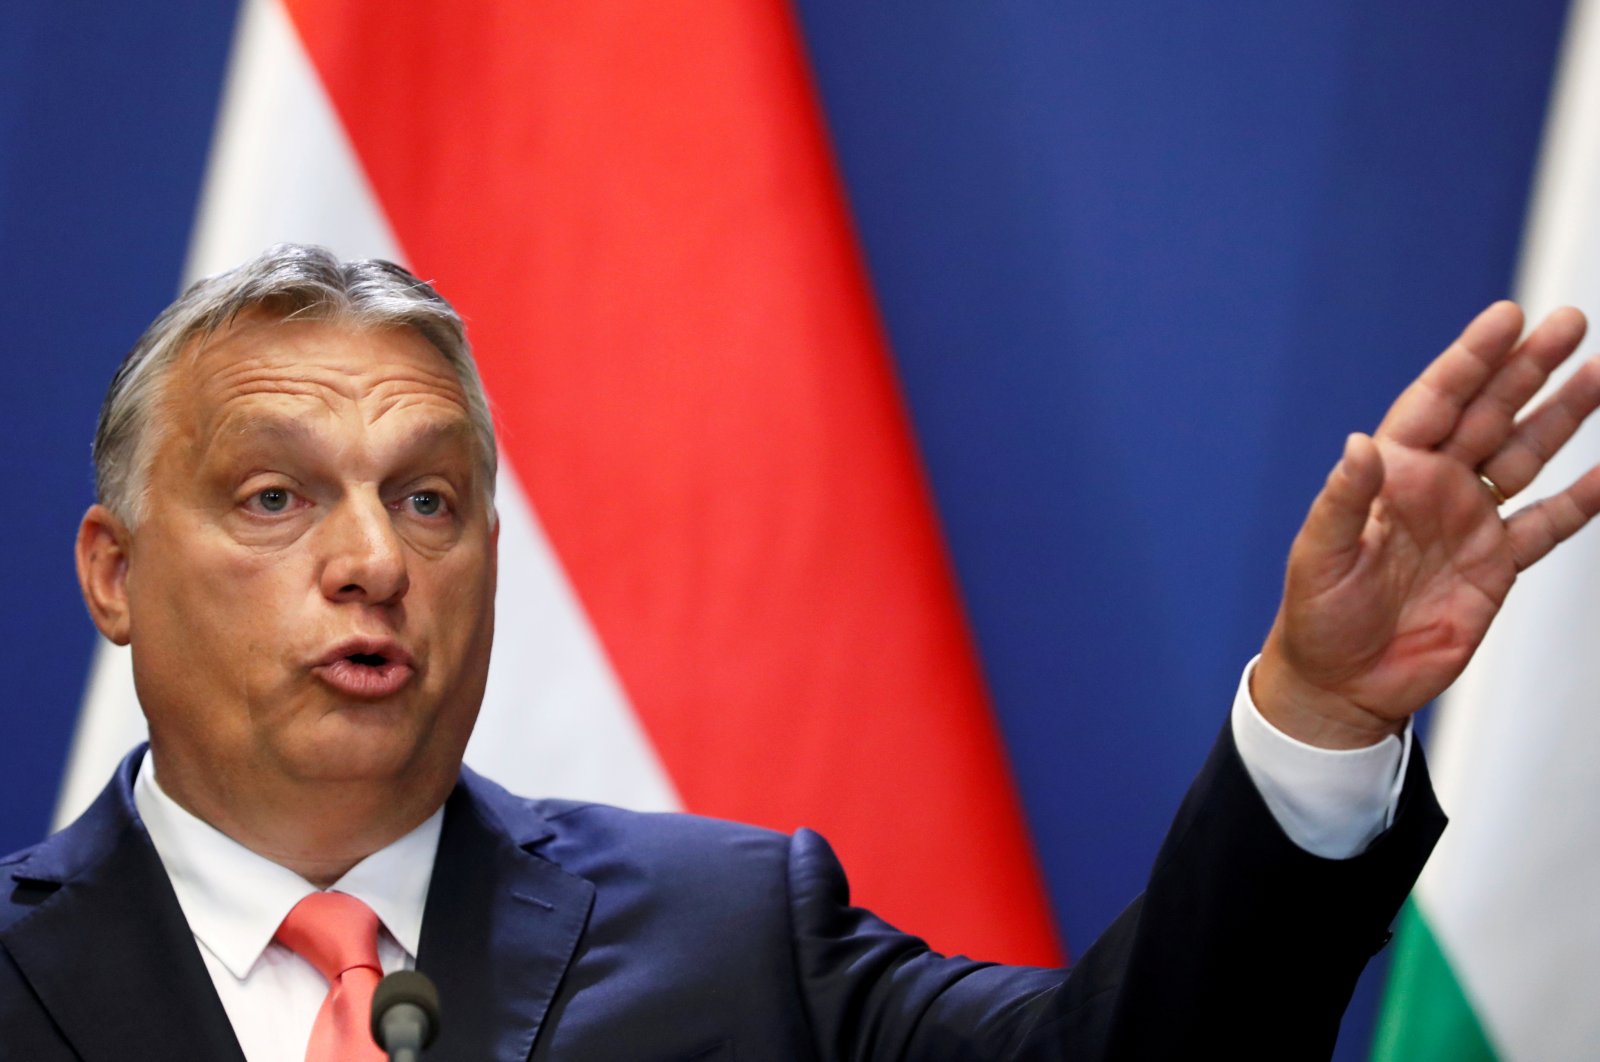 Hungarian Prime Minister Viktor Orban holds a joint news conference with Slovak Prime Minister Igor Matovic (not pictured) in Budapest, Hungary, June 12, 2020. (Reuters Photo)